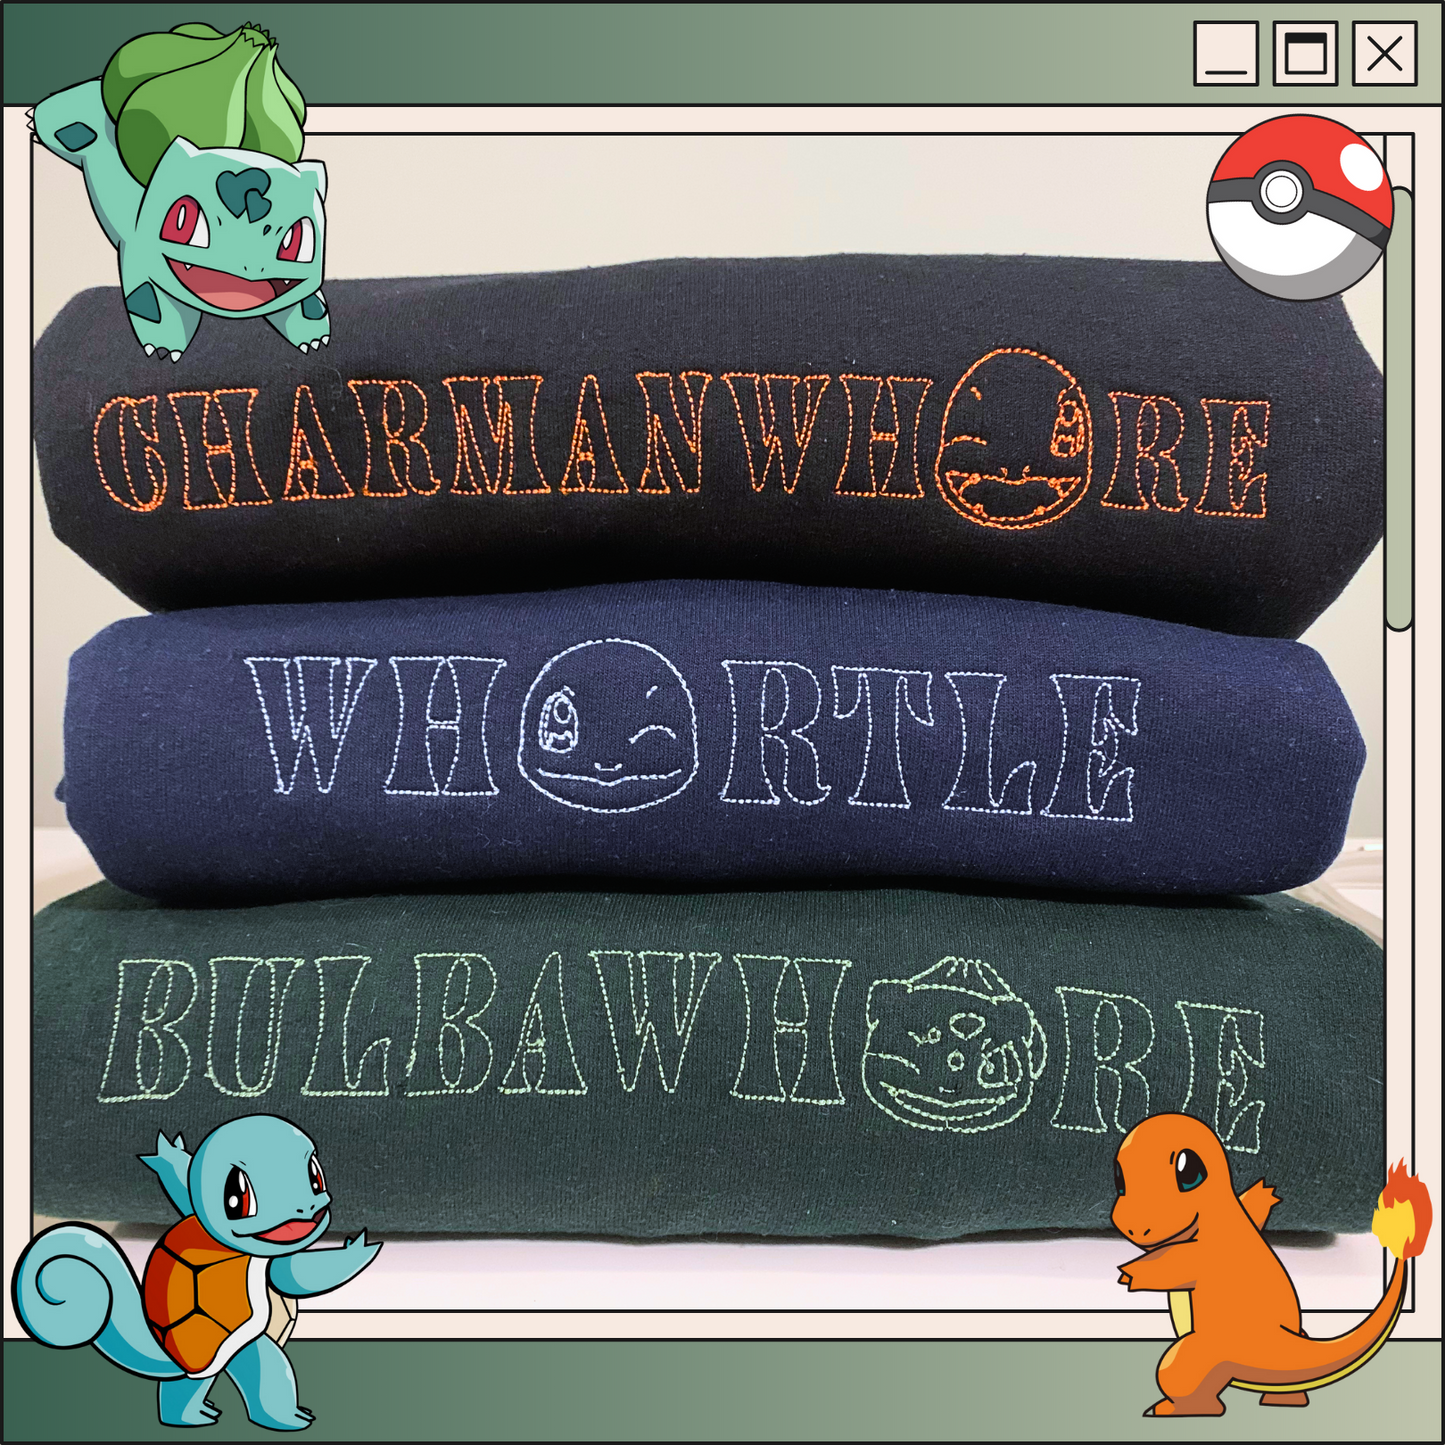 A picture of the three crew neck designs folded and stacked on top of each other. Charmanwhore has orange thread featured on a black crew neck.  Whortle has light blue thread featured on a navy blue crew neck.  Bulbawhore has light green thread featured on a forest green crew neck. Over the picture of the products is a green old school style browser image with the three pokemon starters and a pokeball in the corners of the image.